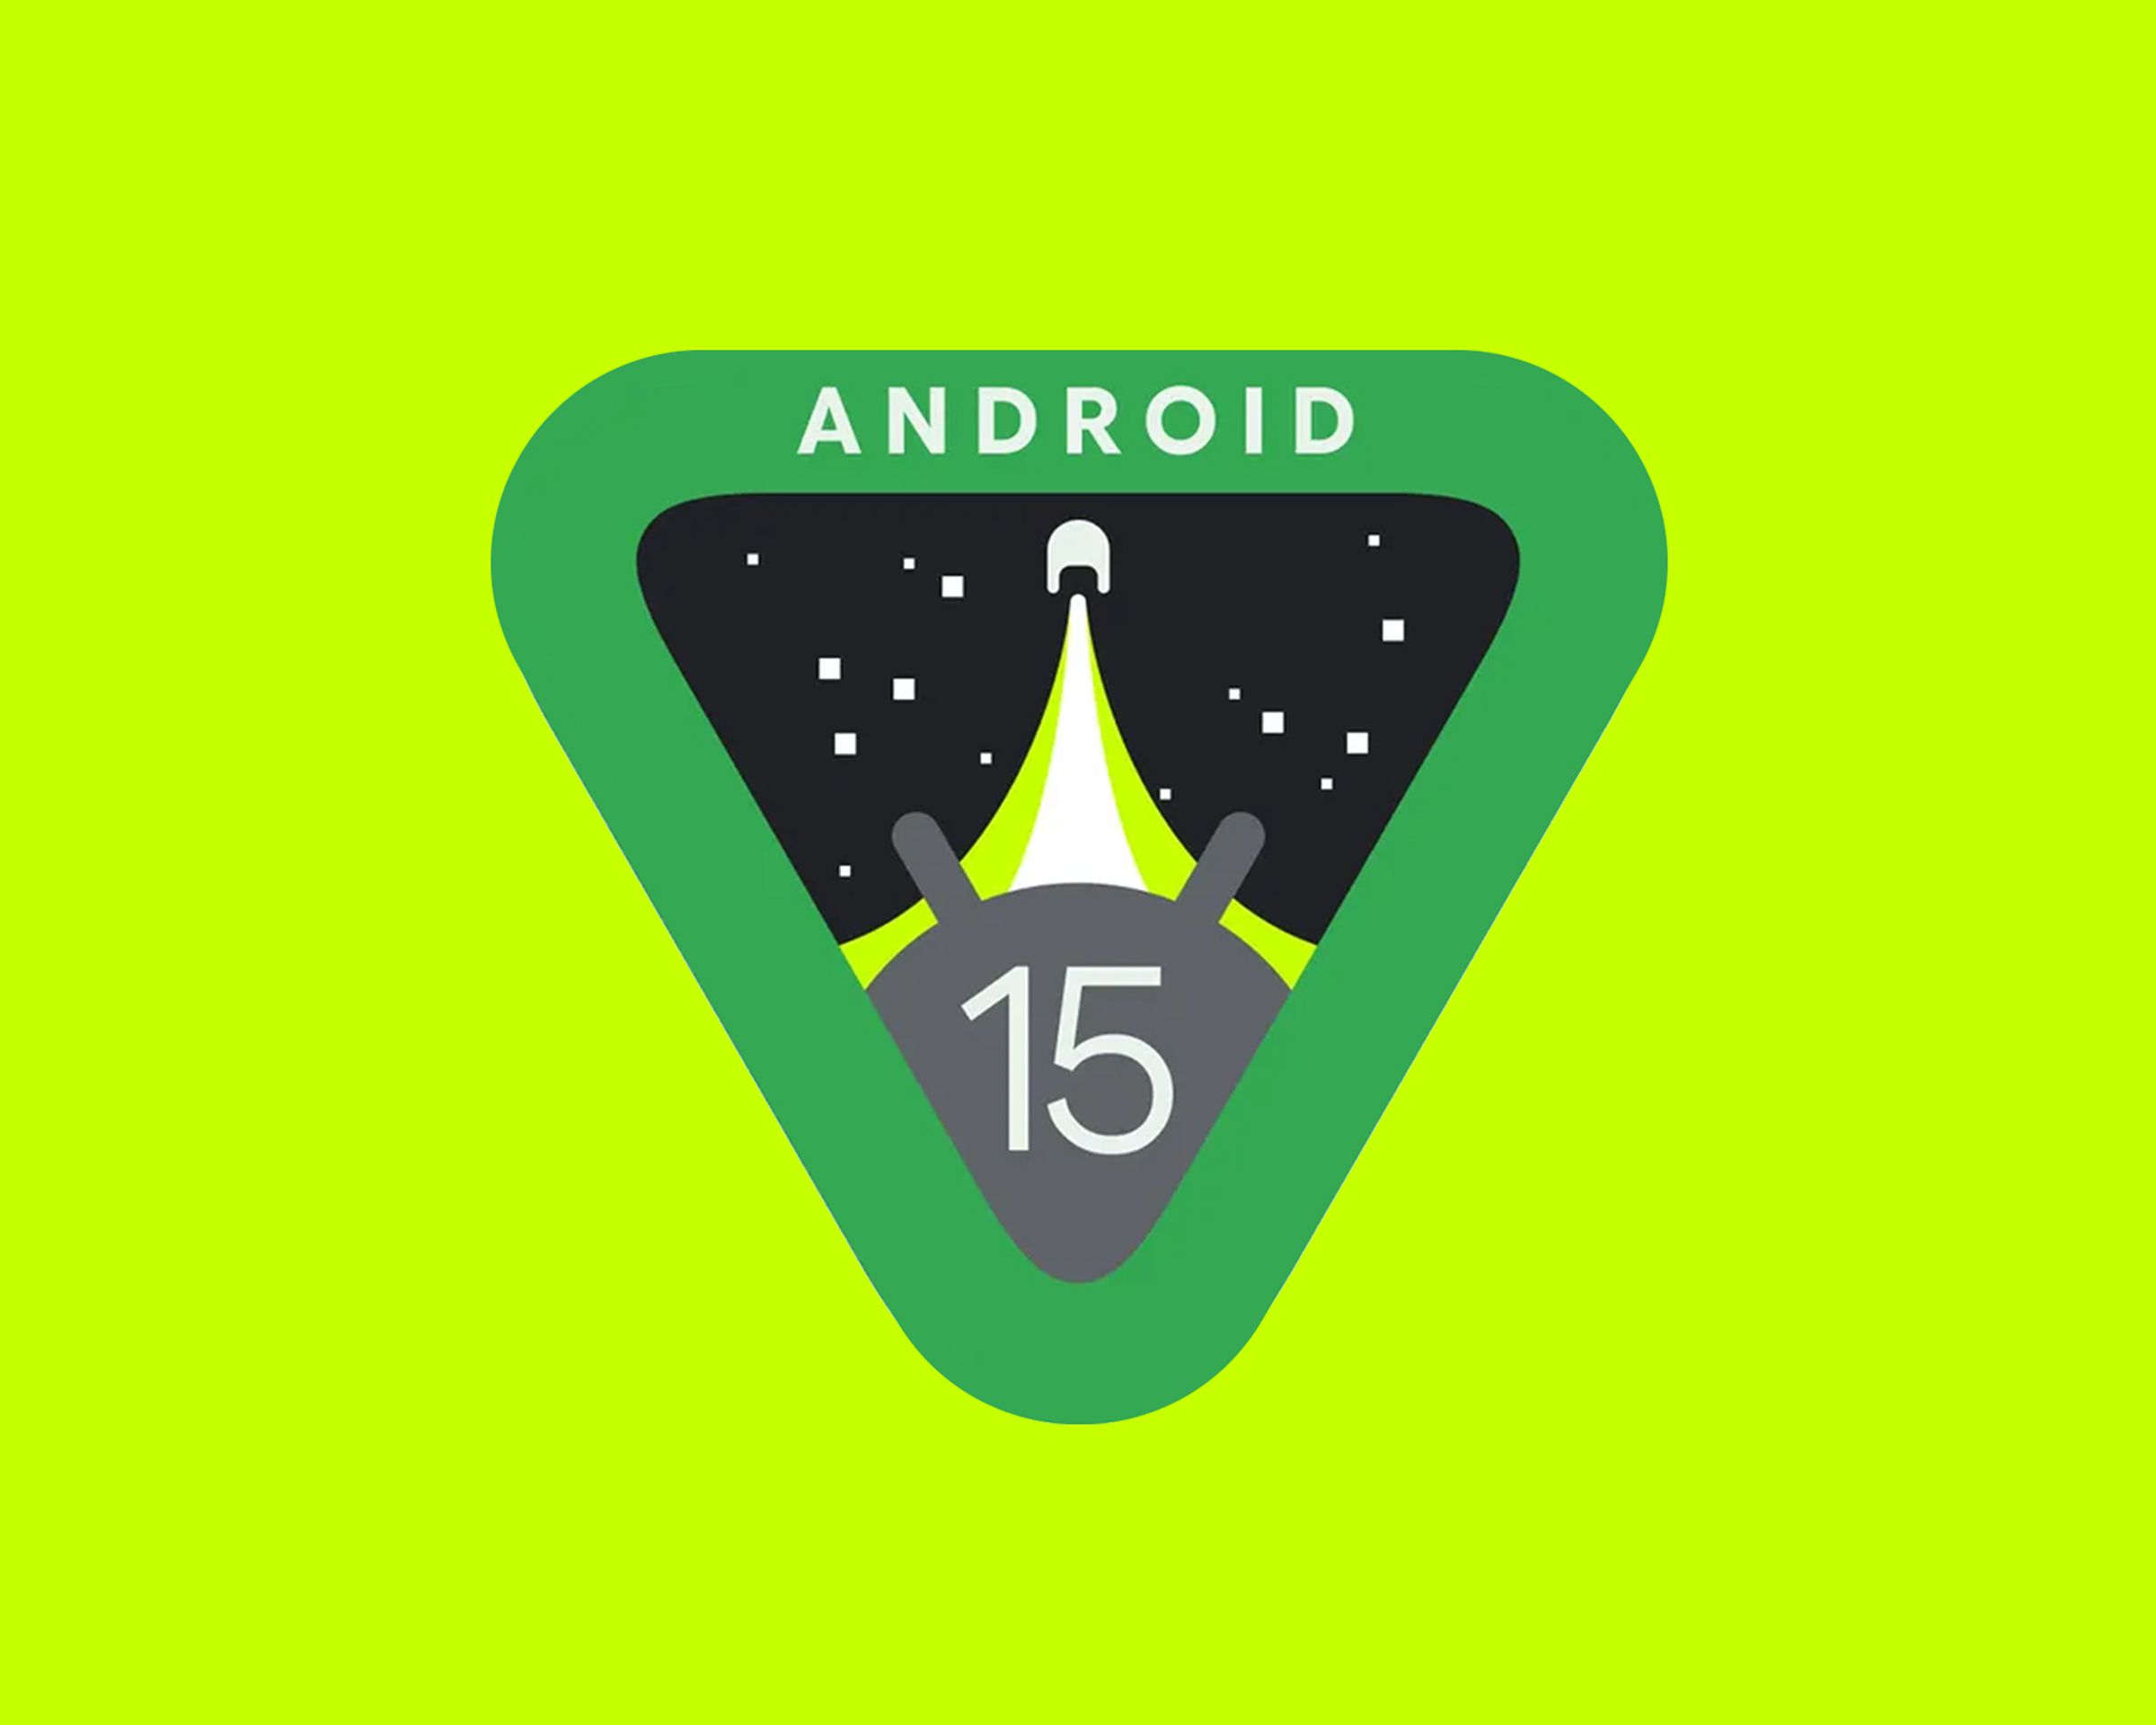 The Android 15 logo on a light green background.